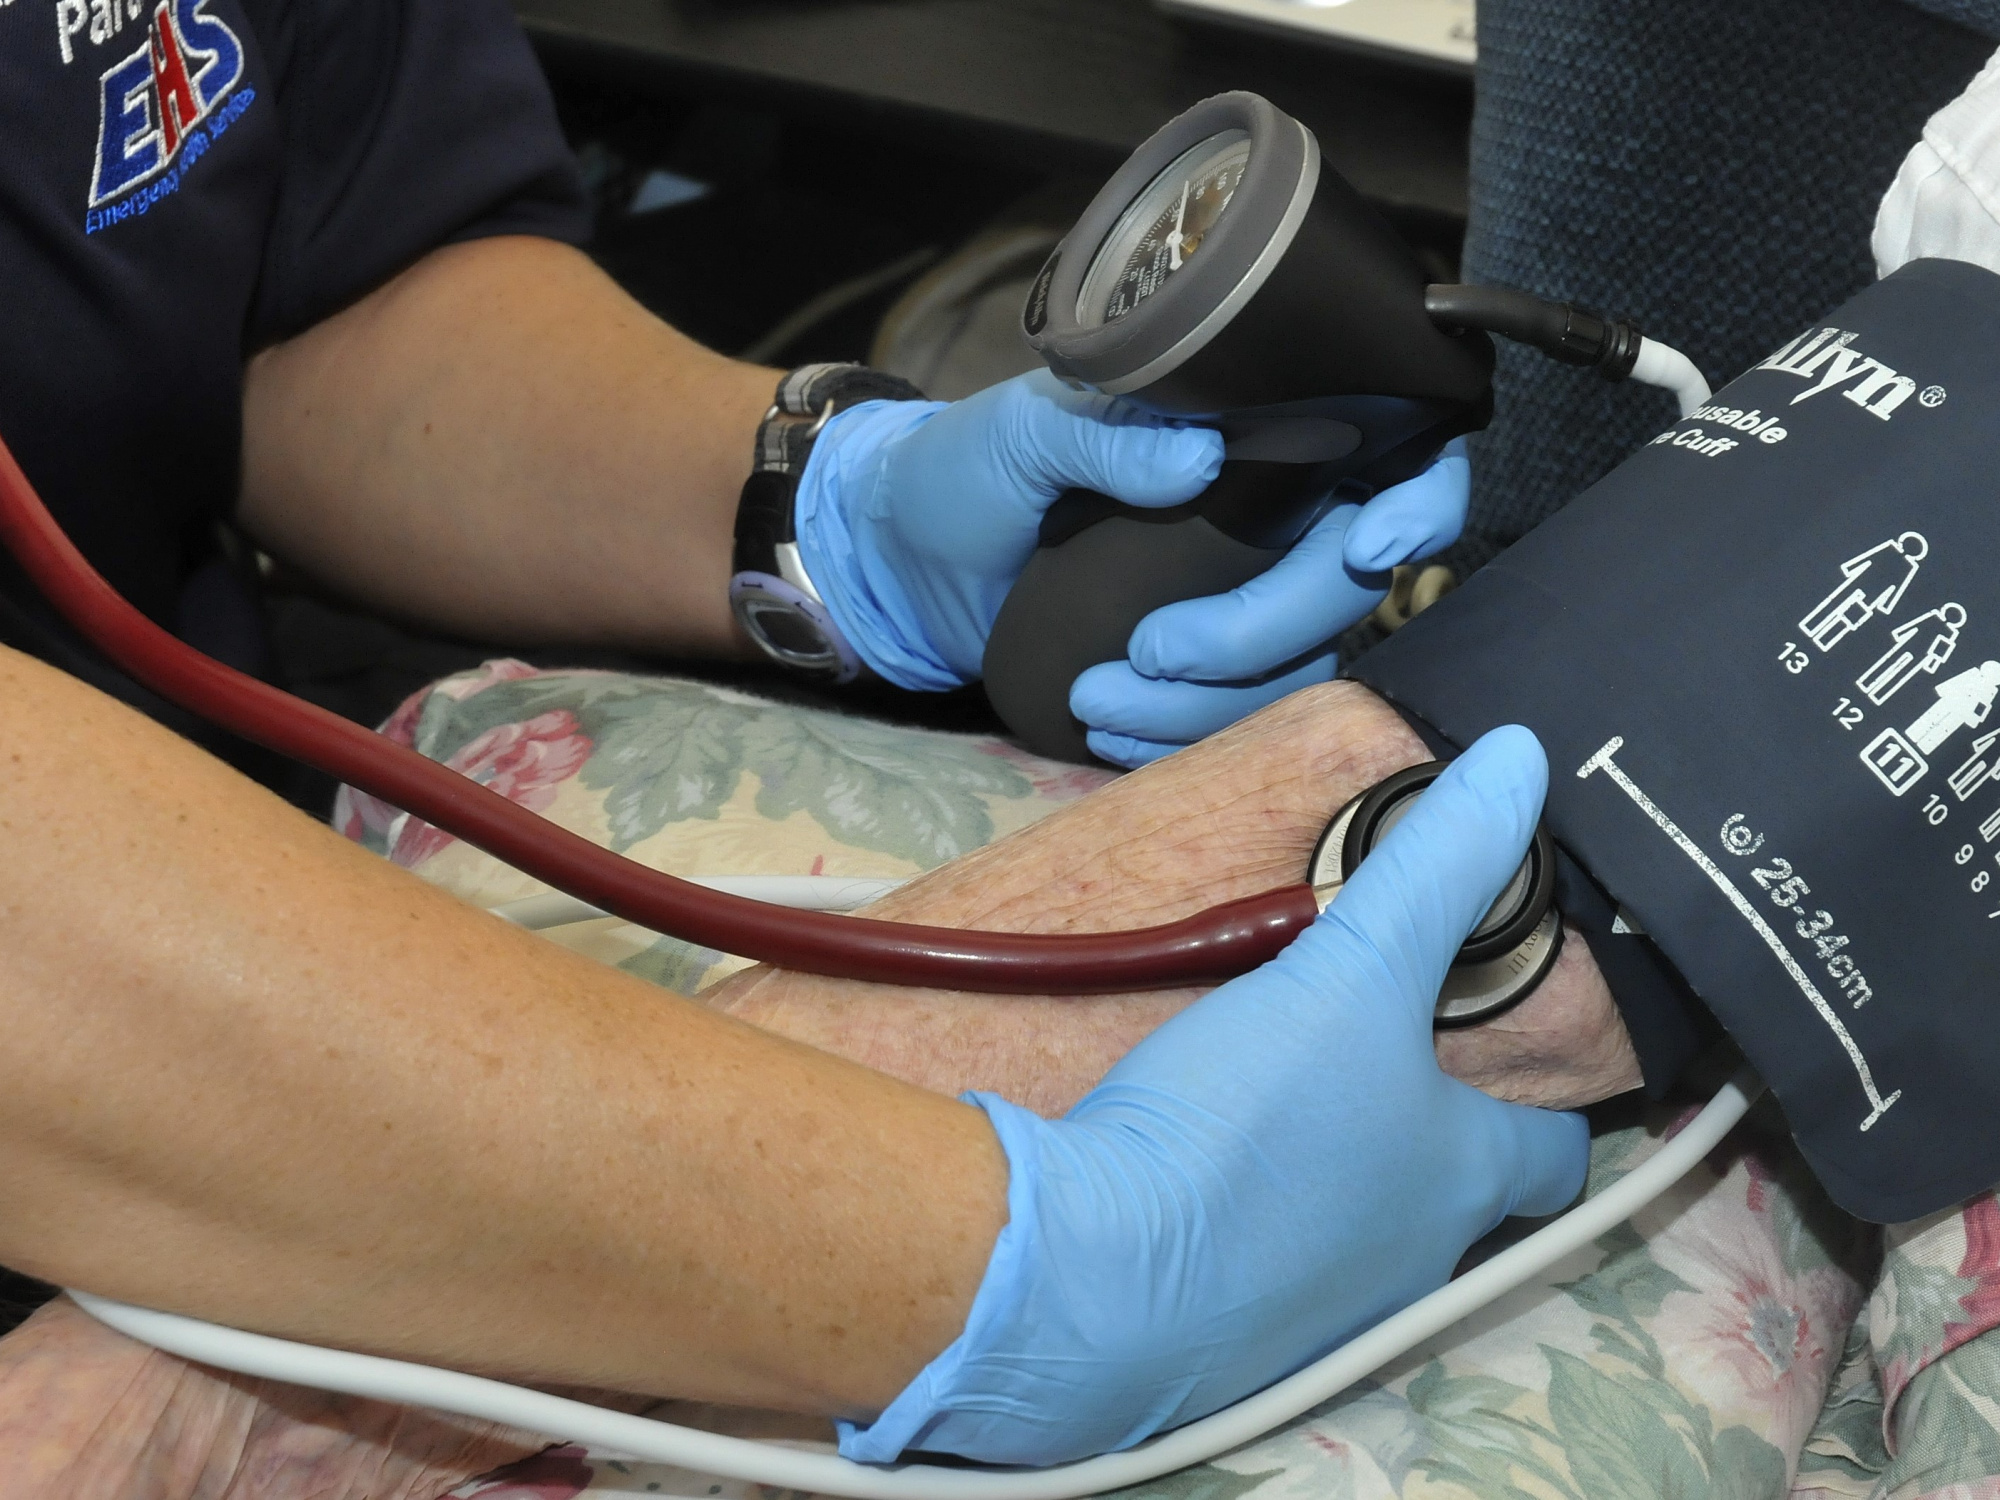 Photo showing the hands of a paramedic taking a patient's blood pressure